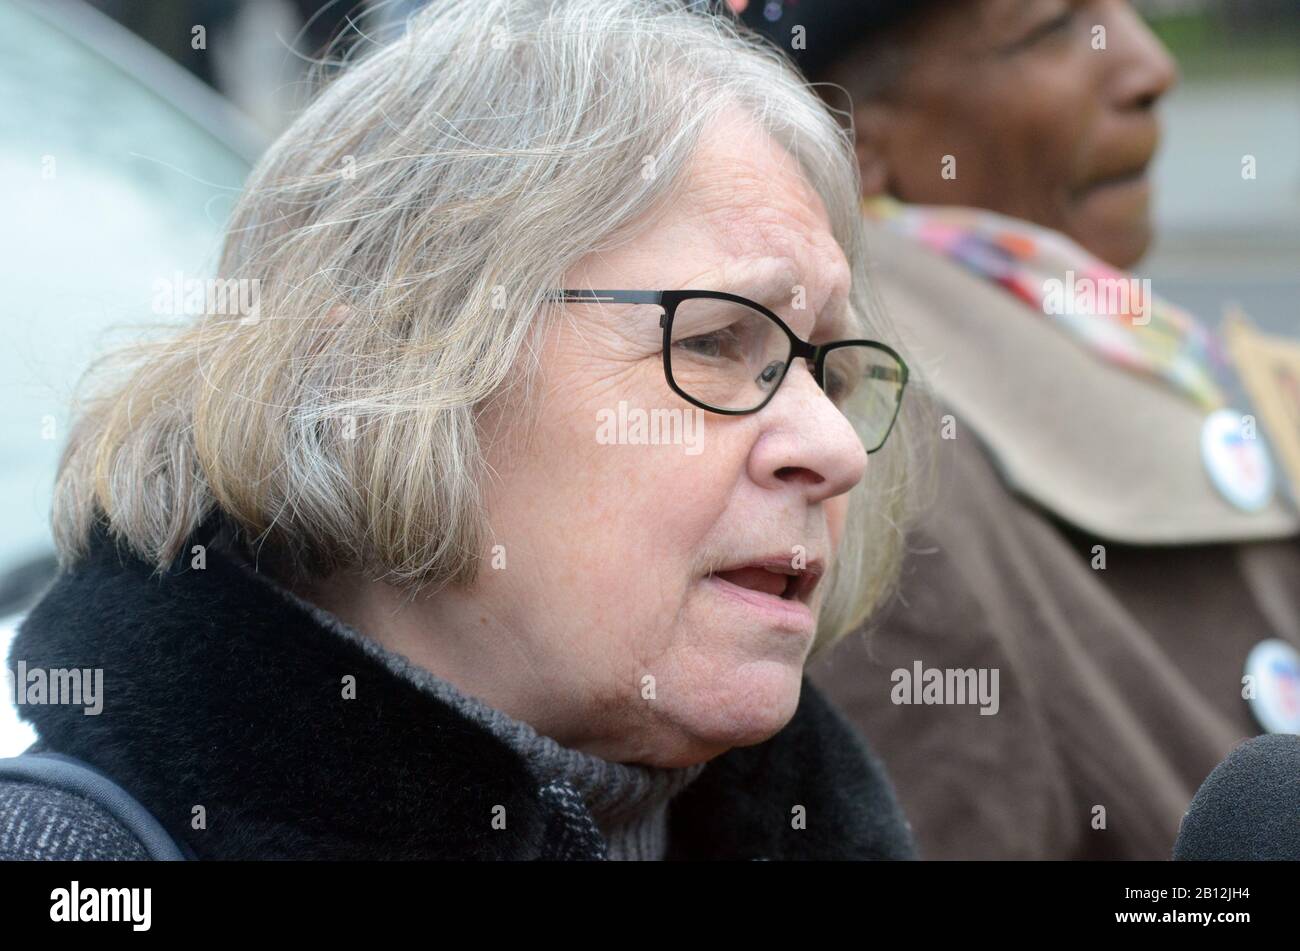 London, UK, 22 Feb 2020 Lindsey Ann German[1] (born 1951)[2] is a British left-wing political activist. A founding member and convenor of the British anti-war organisation Stop the War Coalition, she was formerly a member of the Socialist Workers Party, sitting on its central committee and editor of its magazine, Socialist Review. Rally against the extradition of Julian Assange in Parliament Square. Credit: JOHNNY ARMSTEAD/Alamy Live News Stock Photo